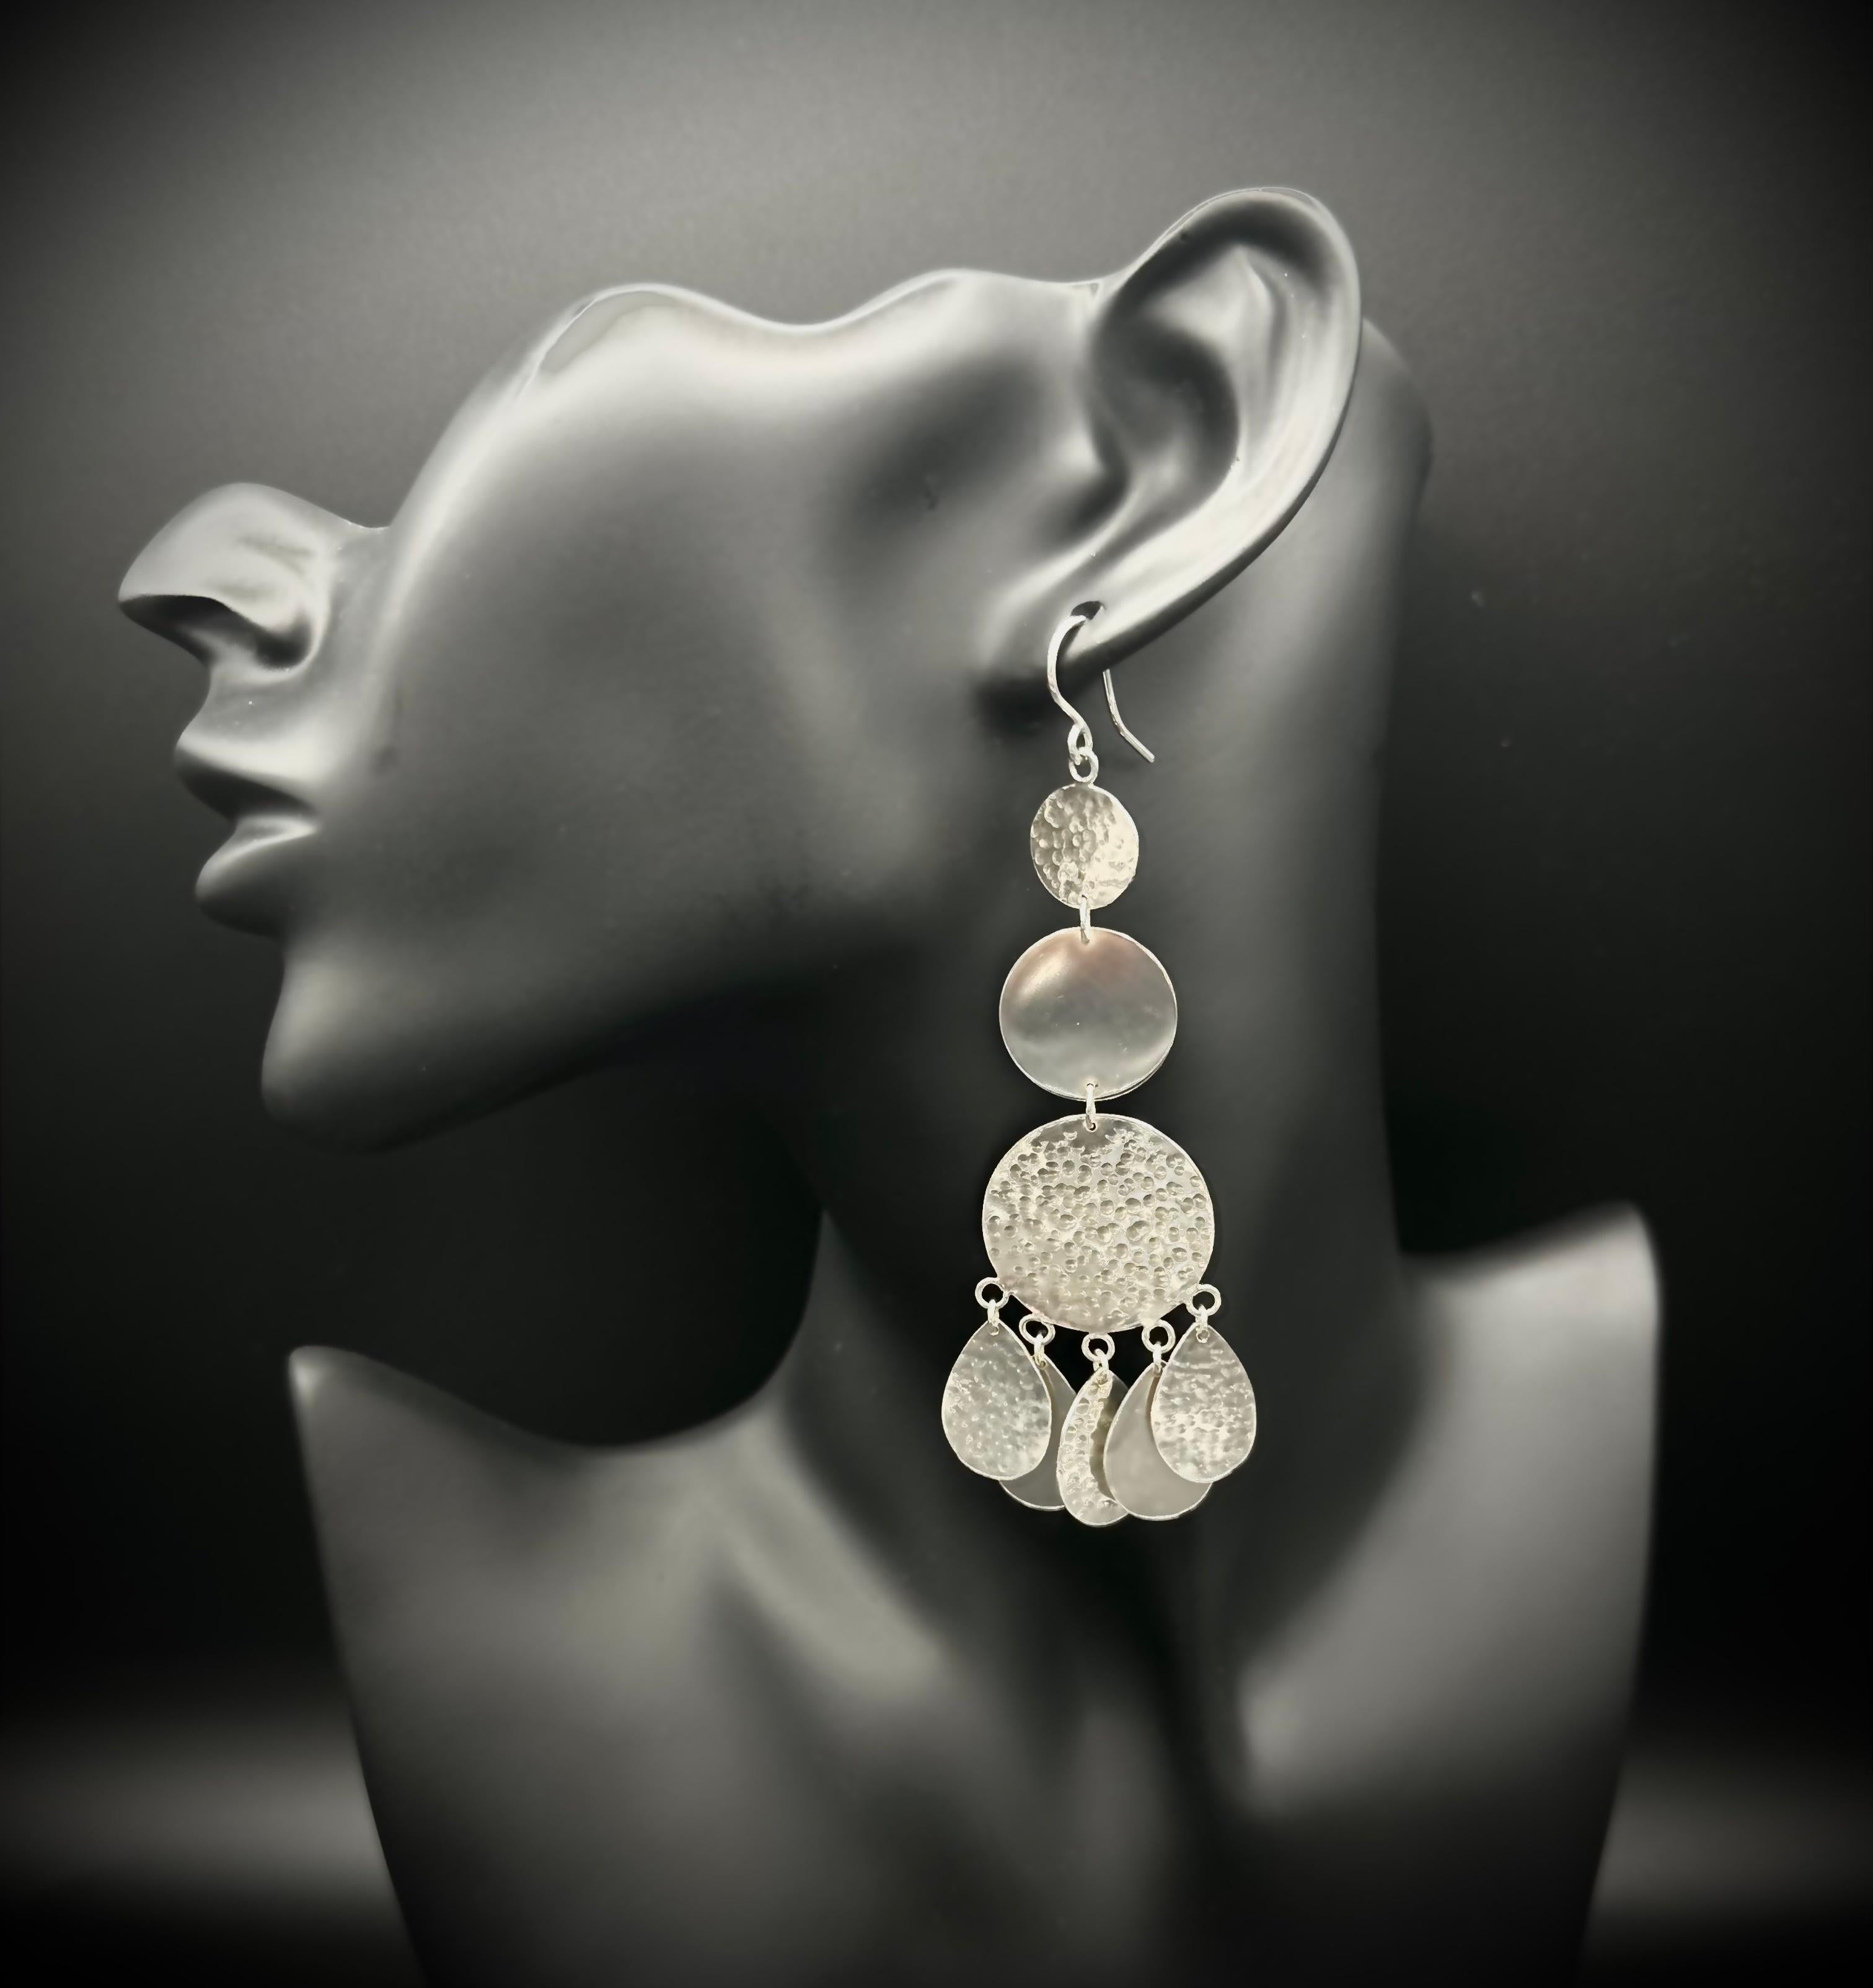 -Handmade
-Sterling silver
-Stamped with Nebu  logo
-95mm

Introducing our striking handmade earrings, designed to make a statement. Measuring 95mm in length, these elegant pieces are aptly named 